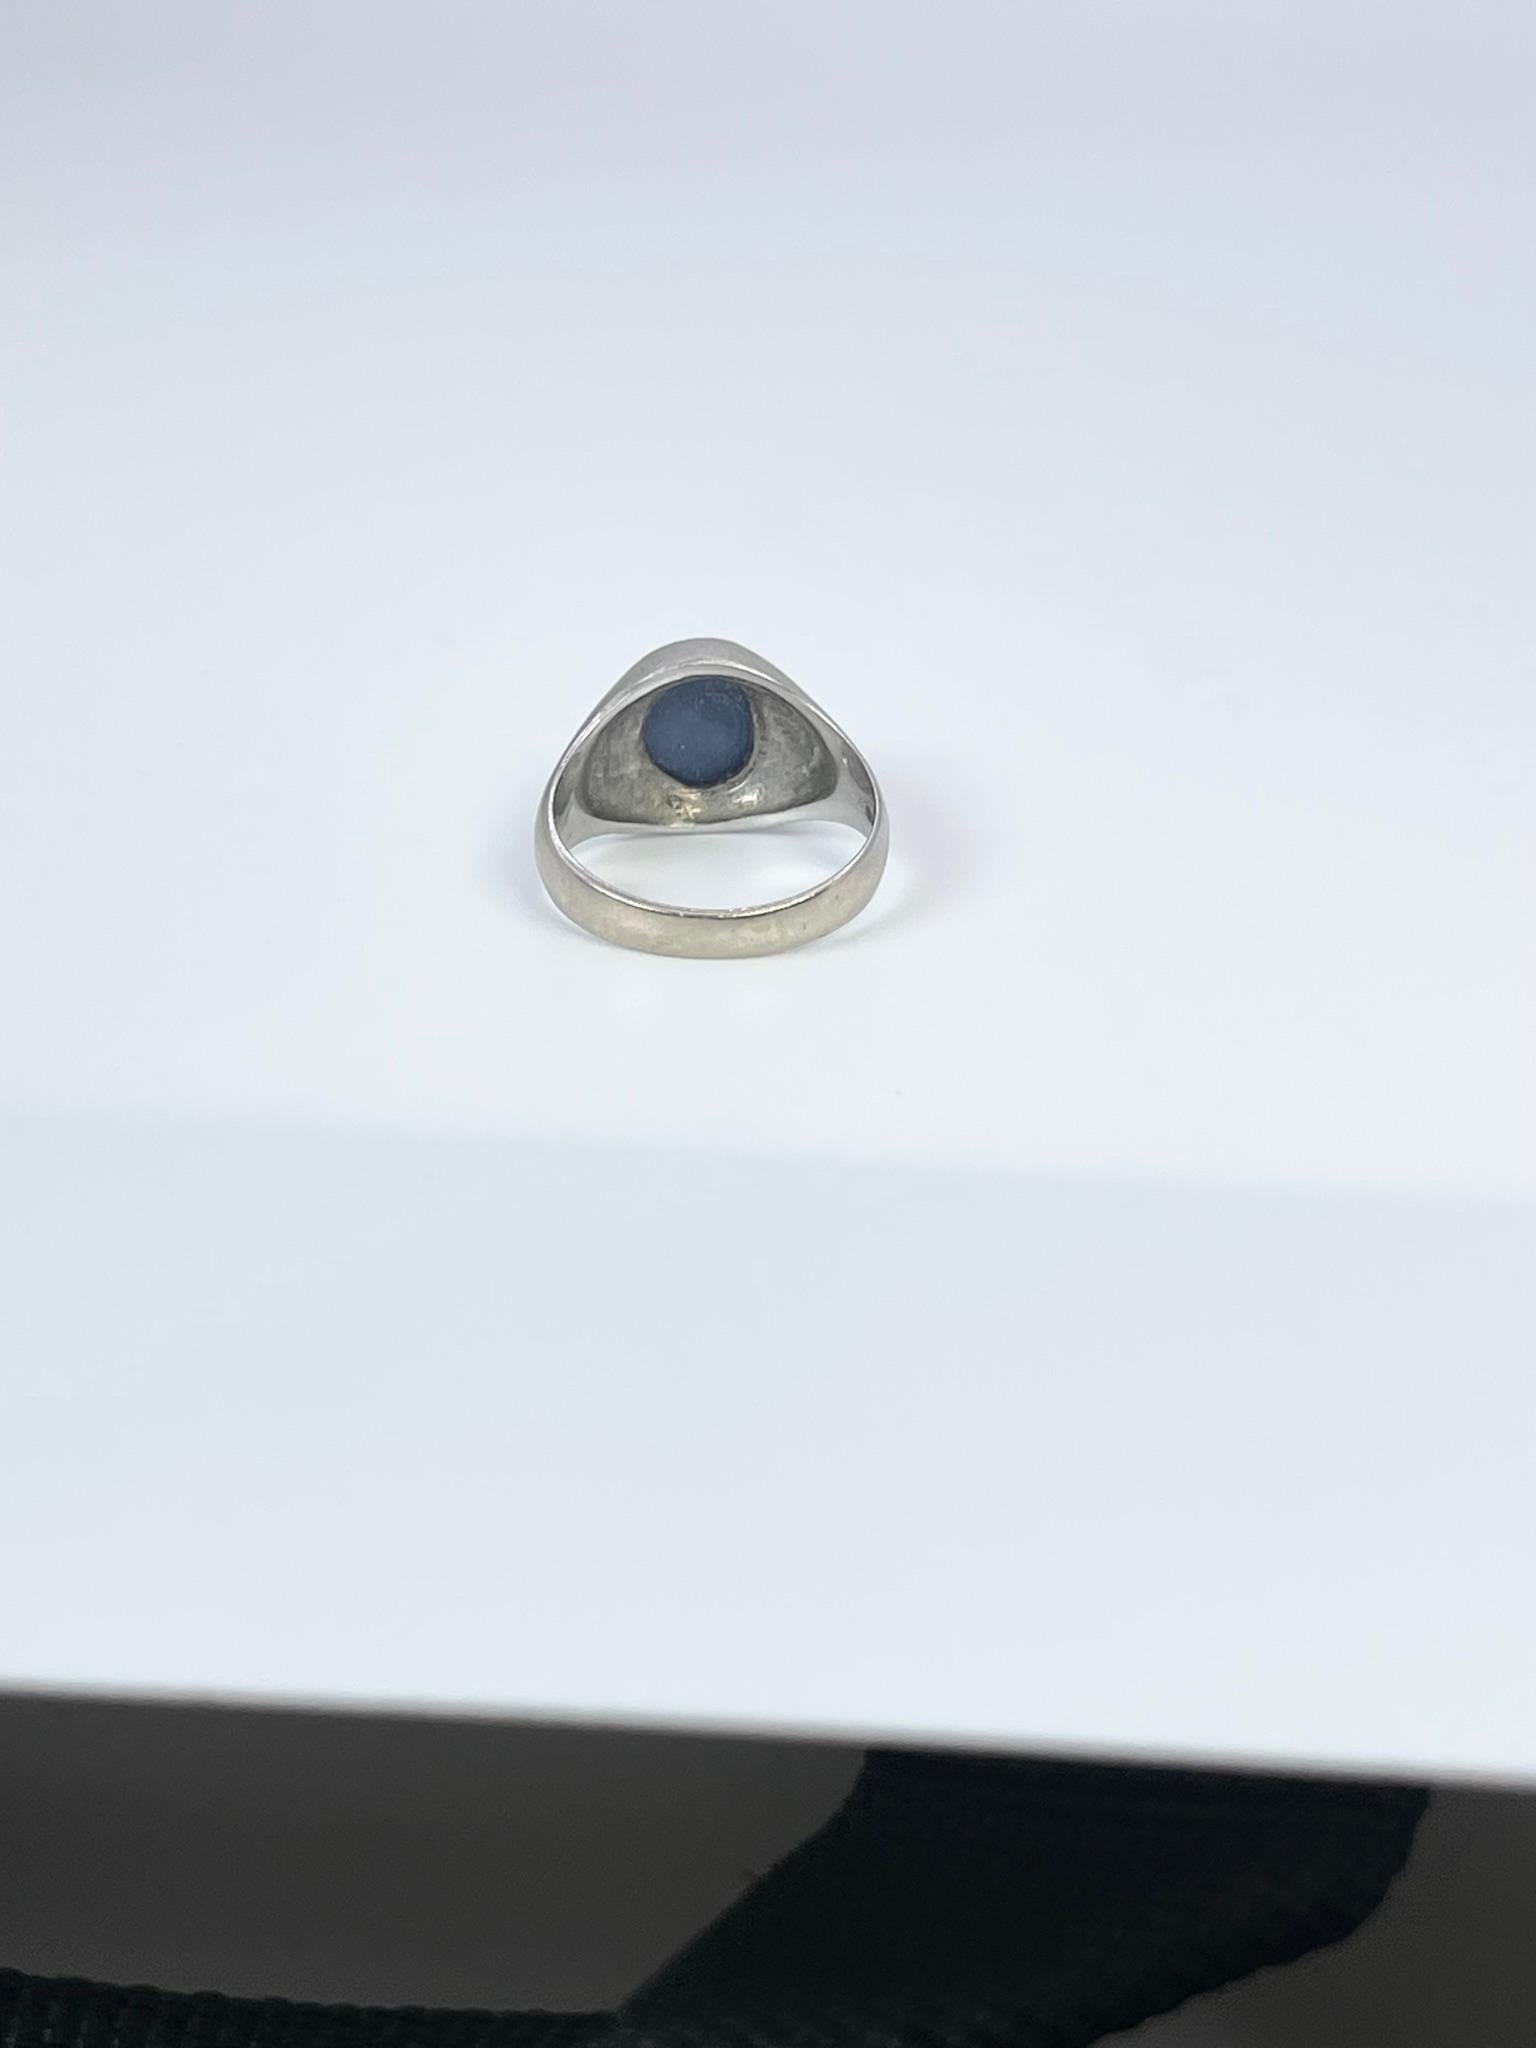 Solitaire Star Sapphire Ring 14Kt White Gold Unisex In Excellent Condition For Sale In Jupiter, FL